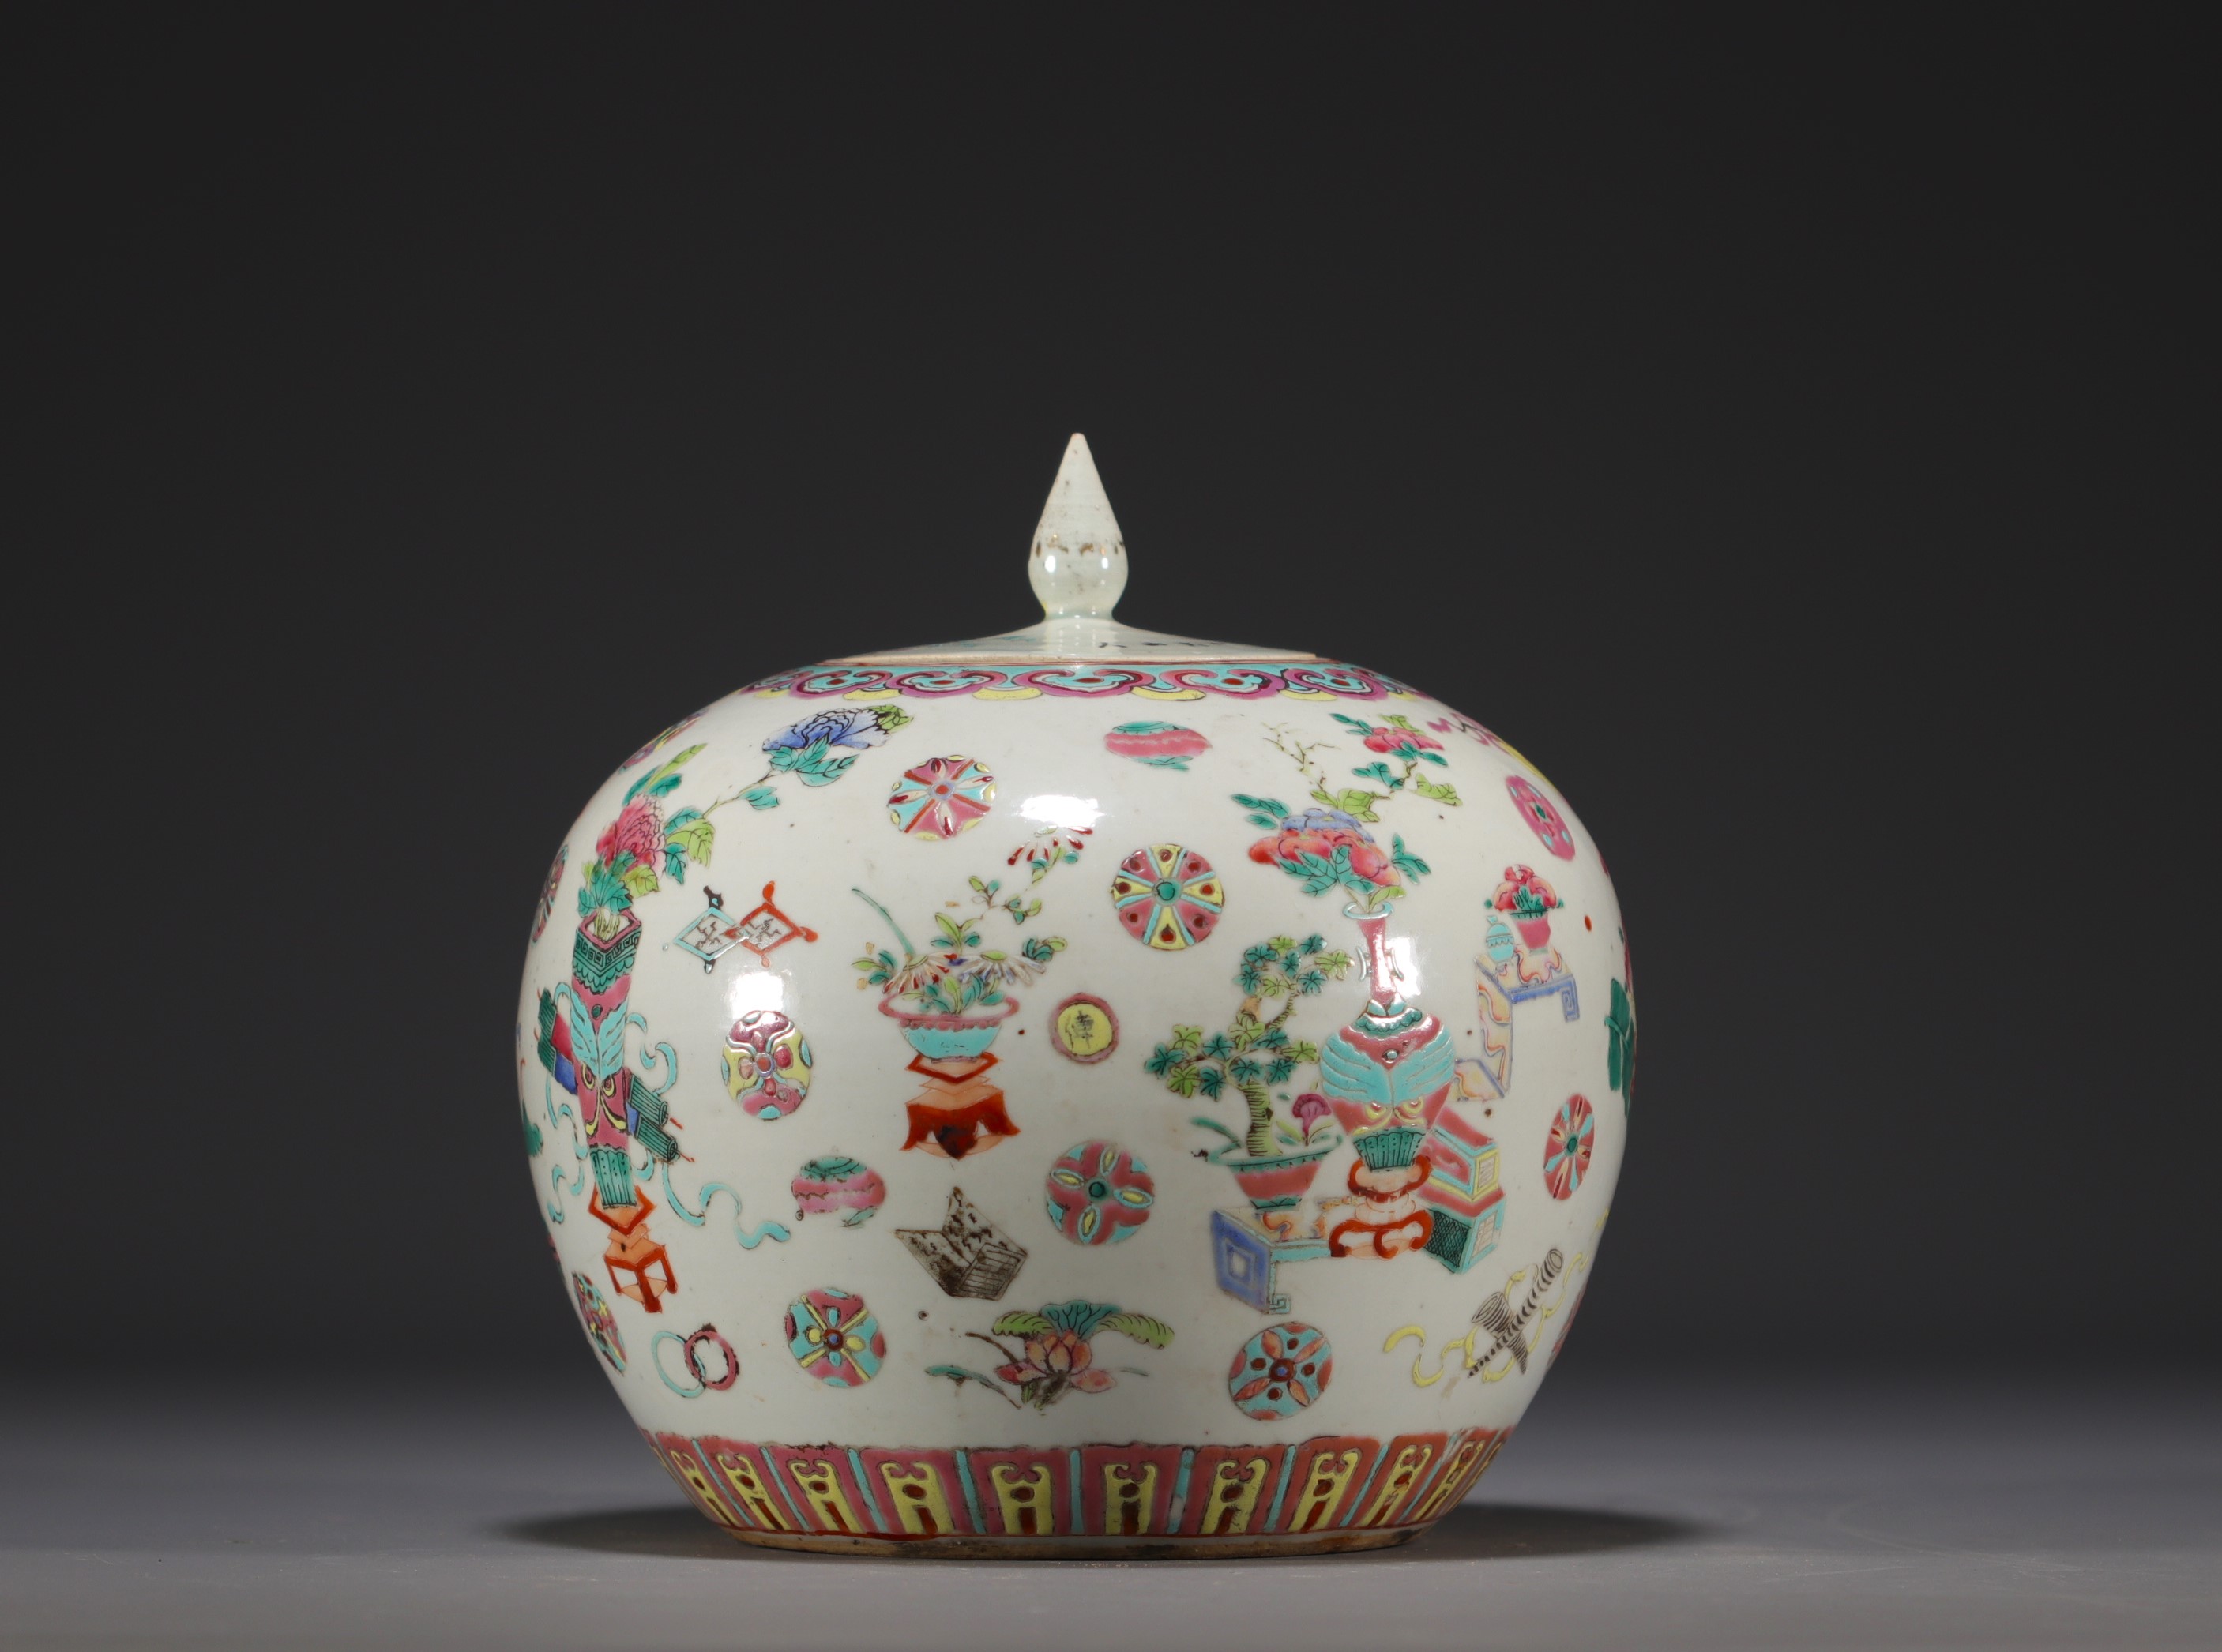 China - A famille rose porcelain ginger pot, 19th century. - Image 3 of 4